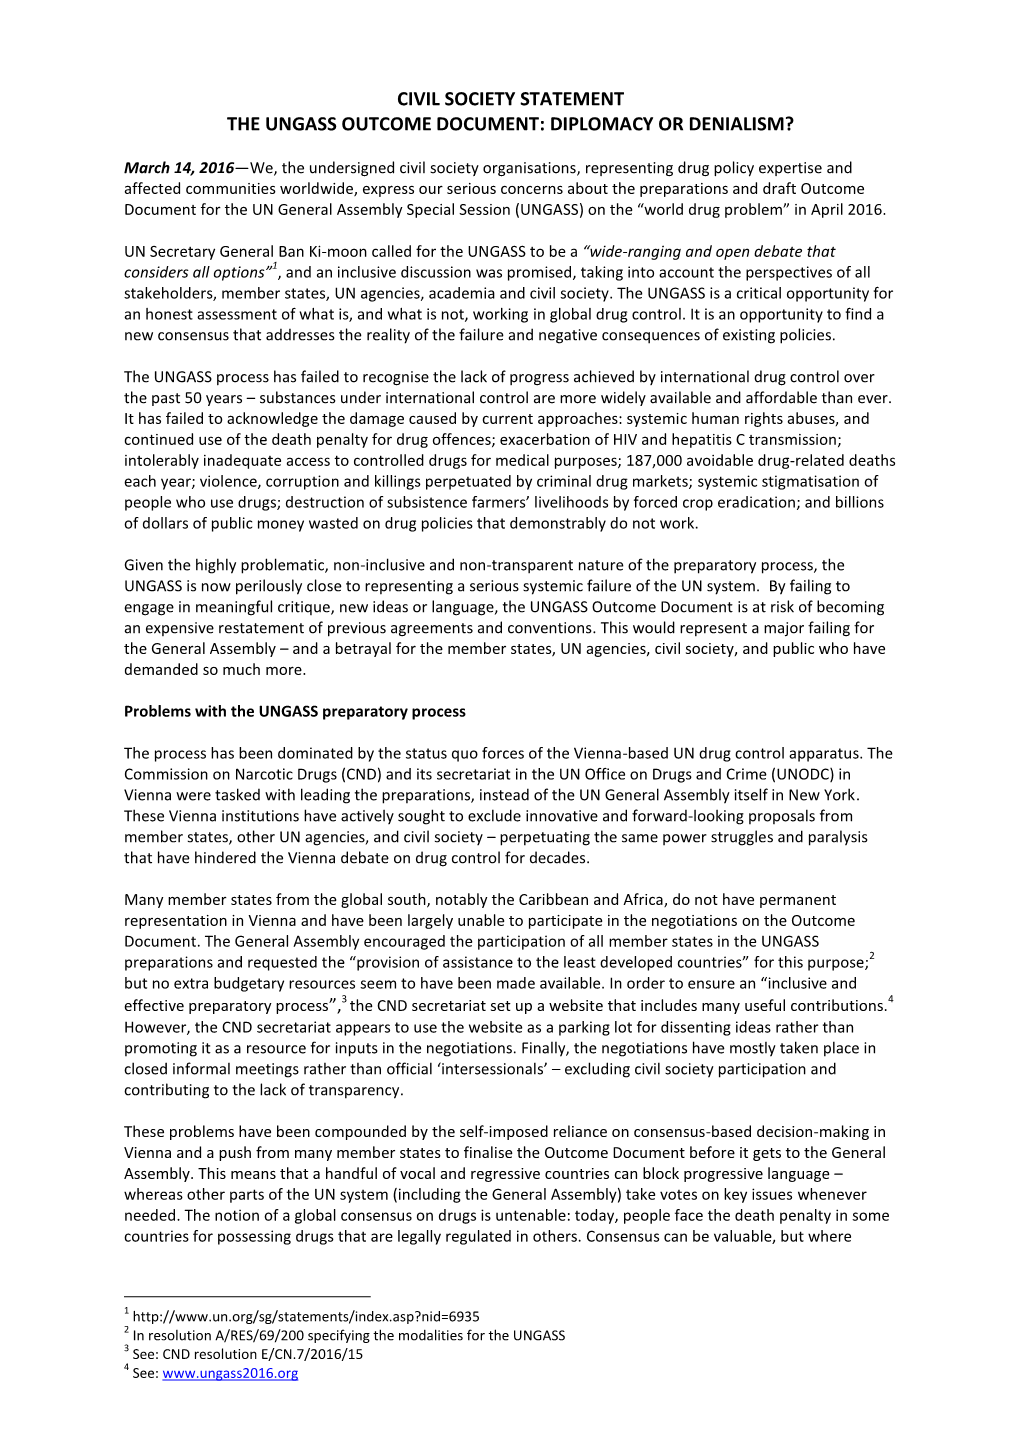 Civil Society Statement the Ungass Outcome Document: Diplomacy Or Denialism?